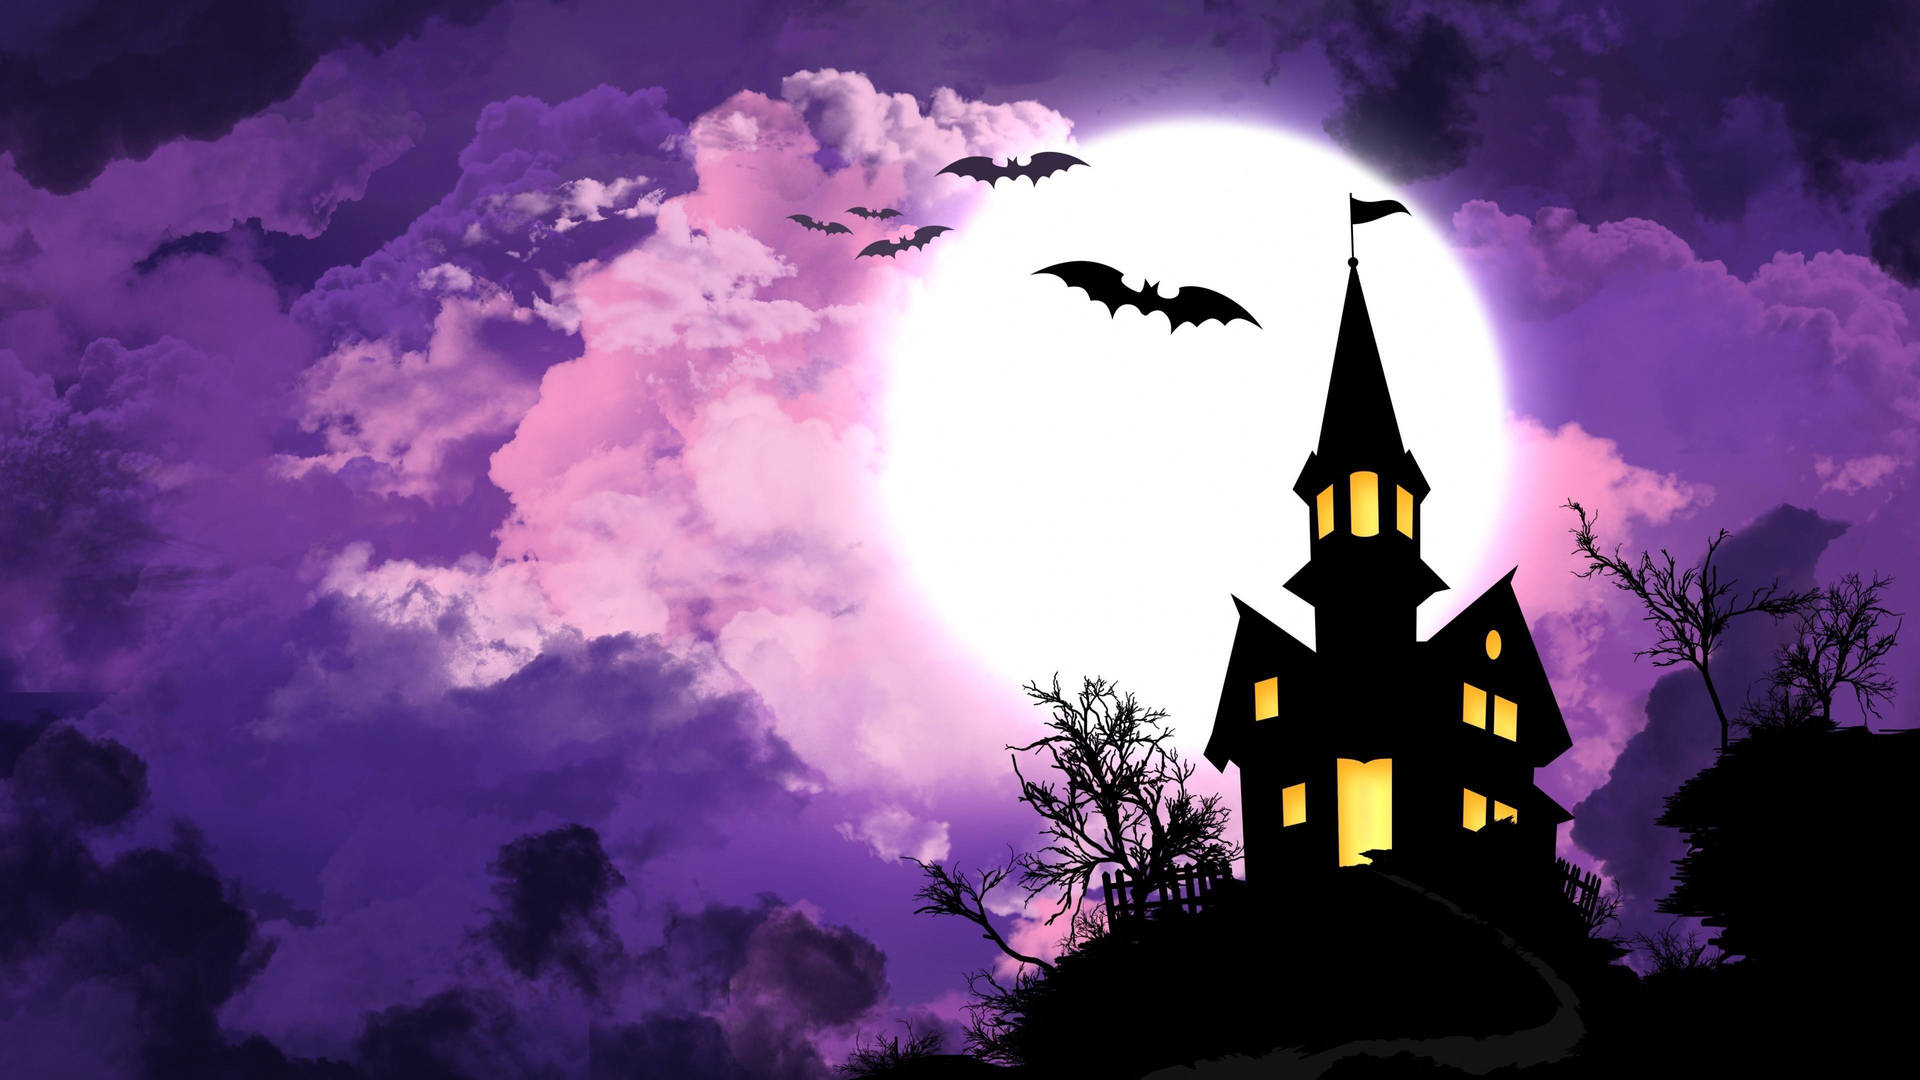 The moon casts a ghostly pall over a haunted house on Halloween night. Wallpaper